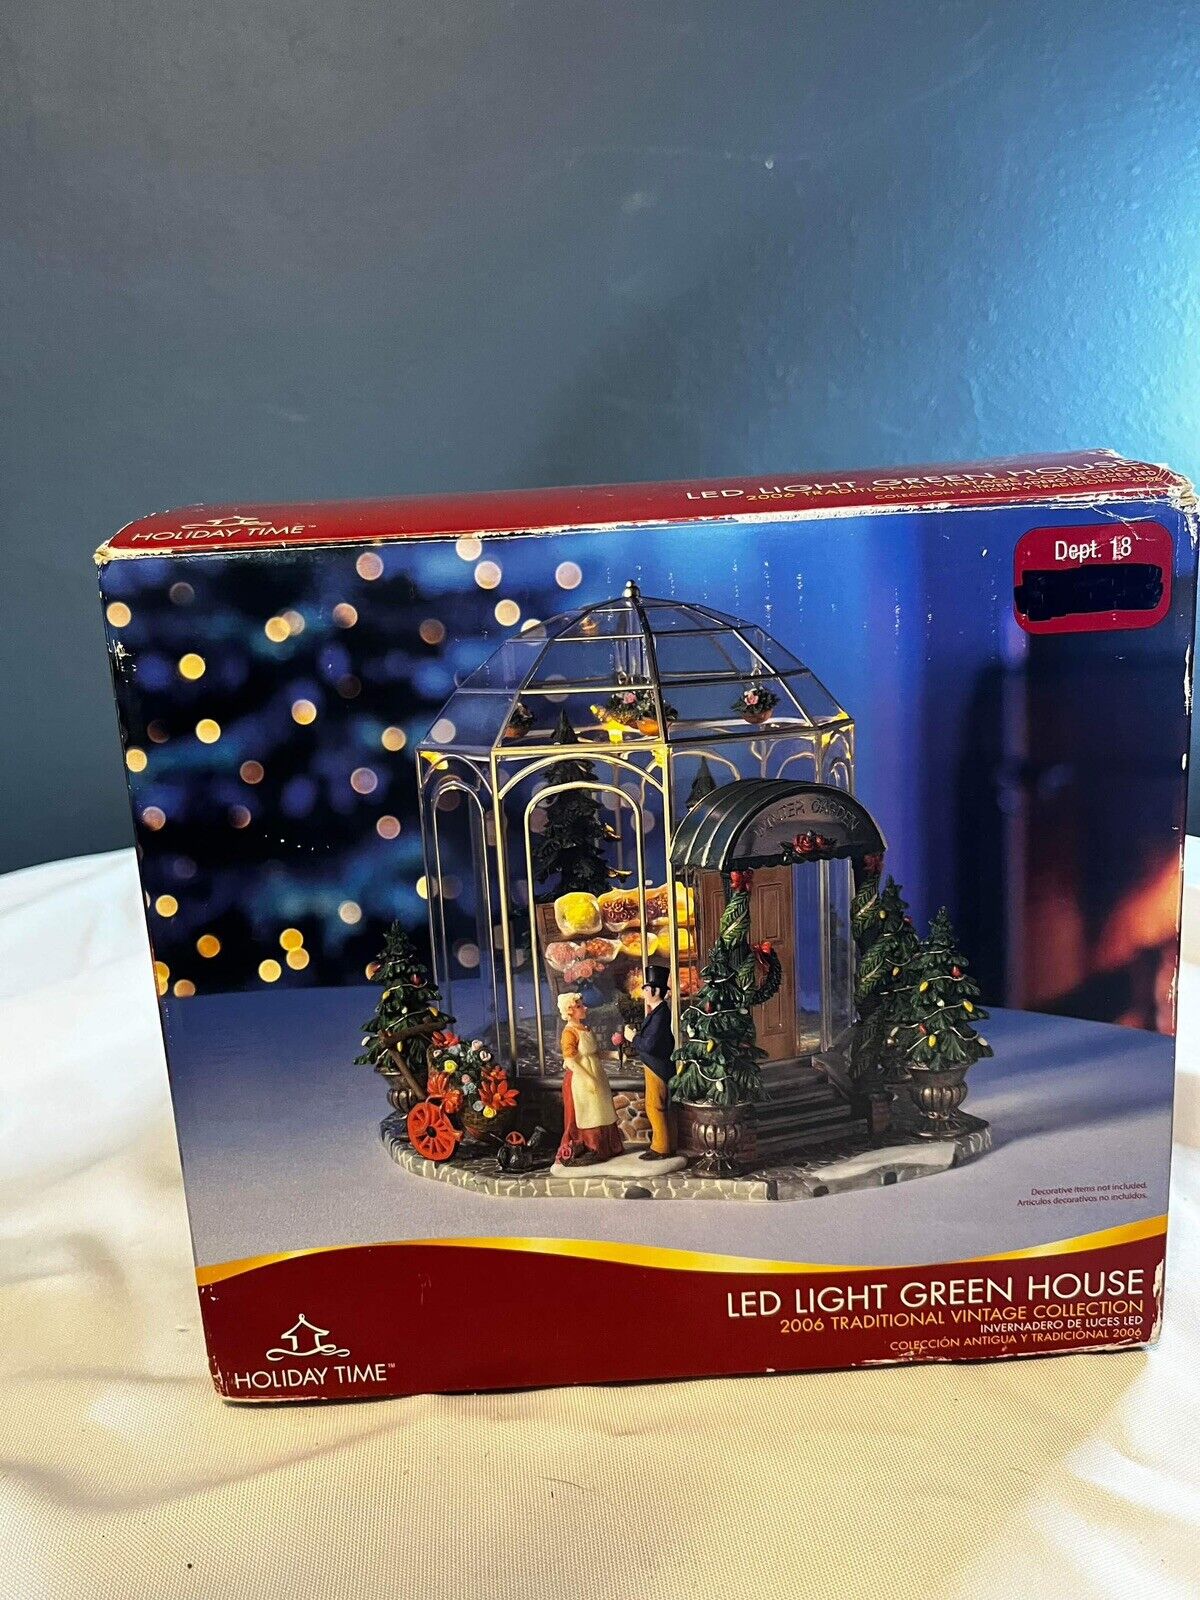 Holiday Time LED Light Green House 2006 Traditional Vintage Collection